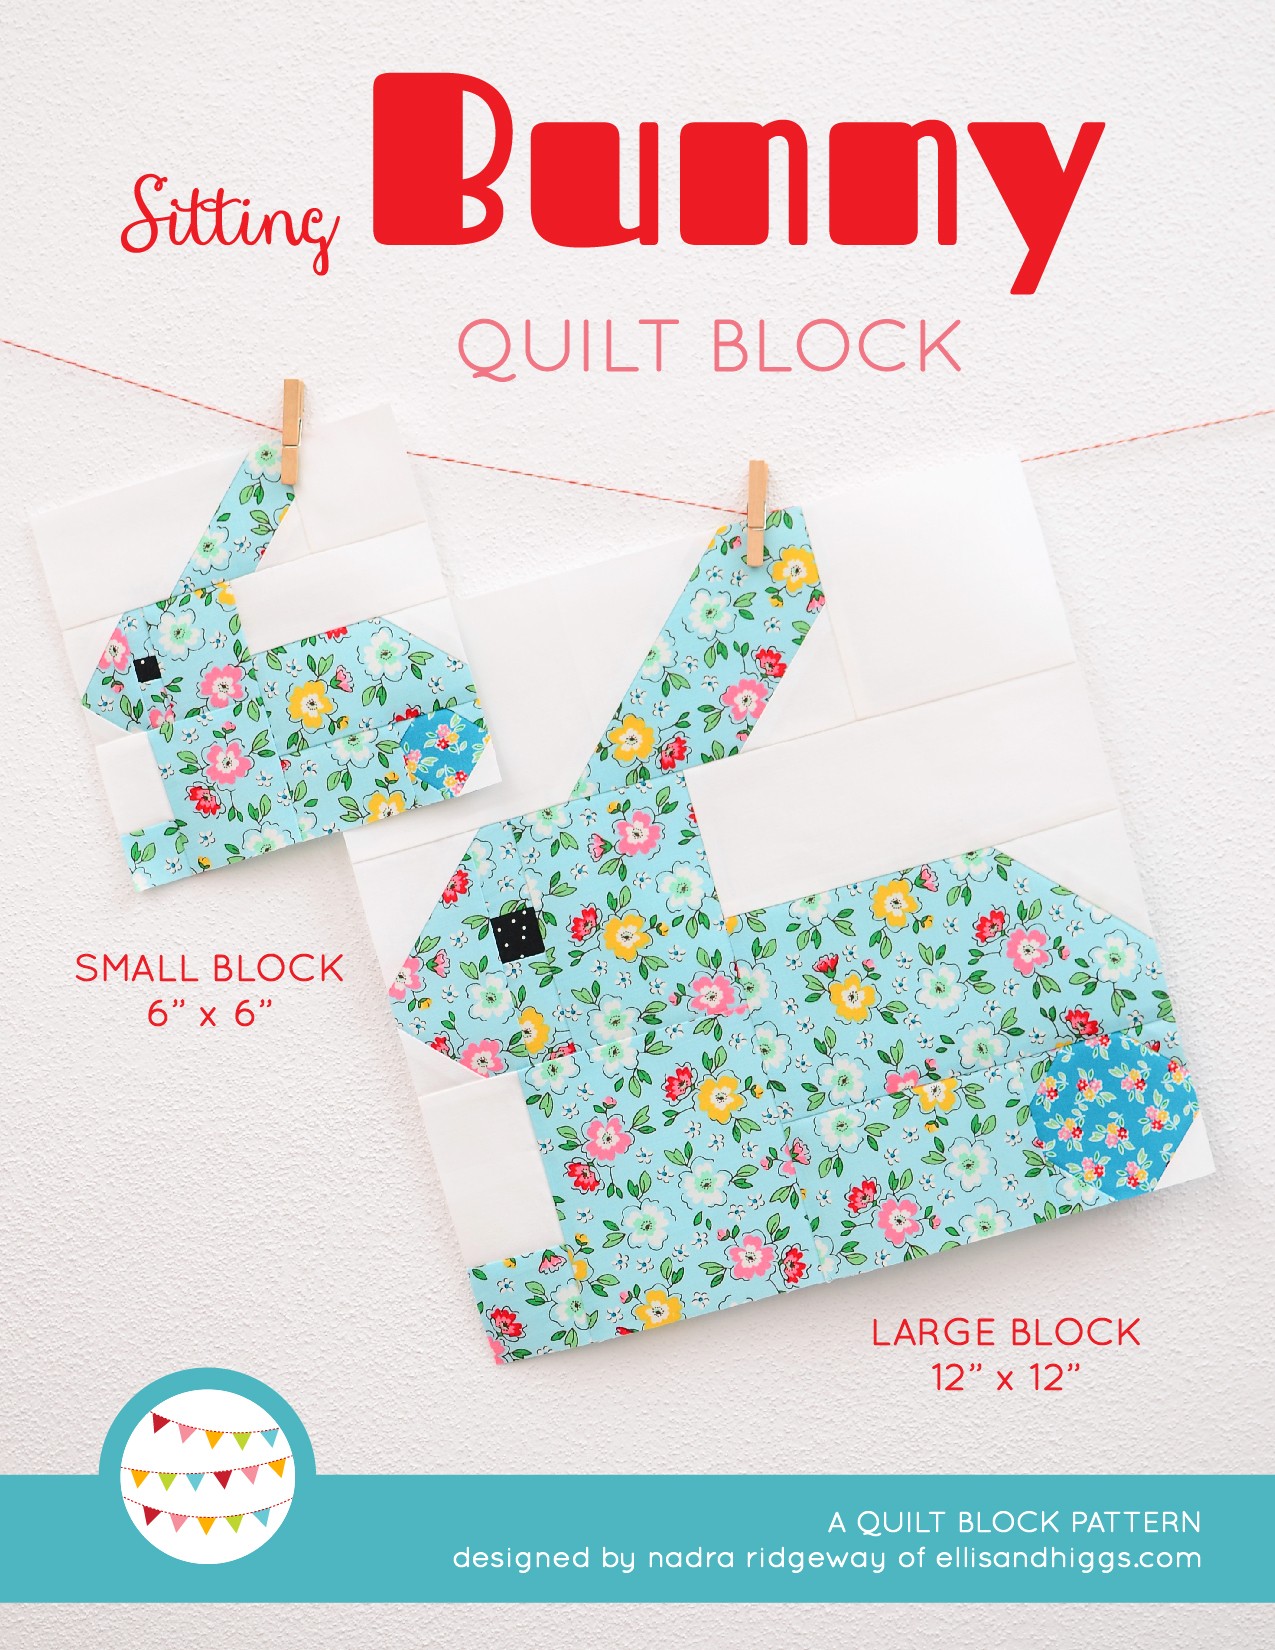 Sitting Bunny quilt block in two sizes hanging on a wall